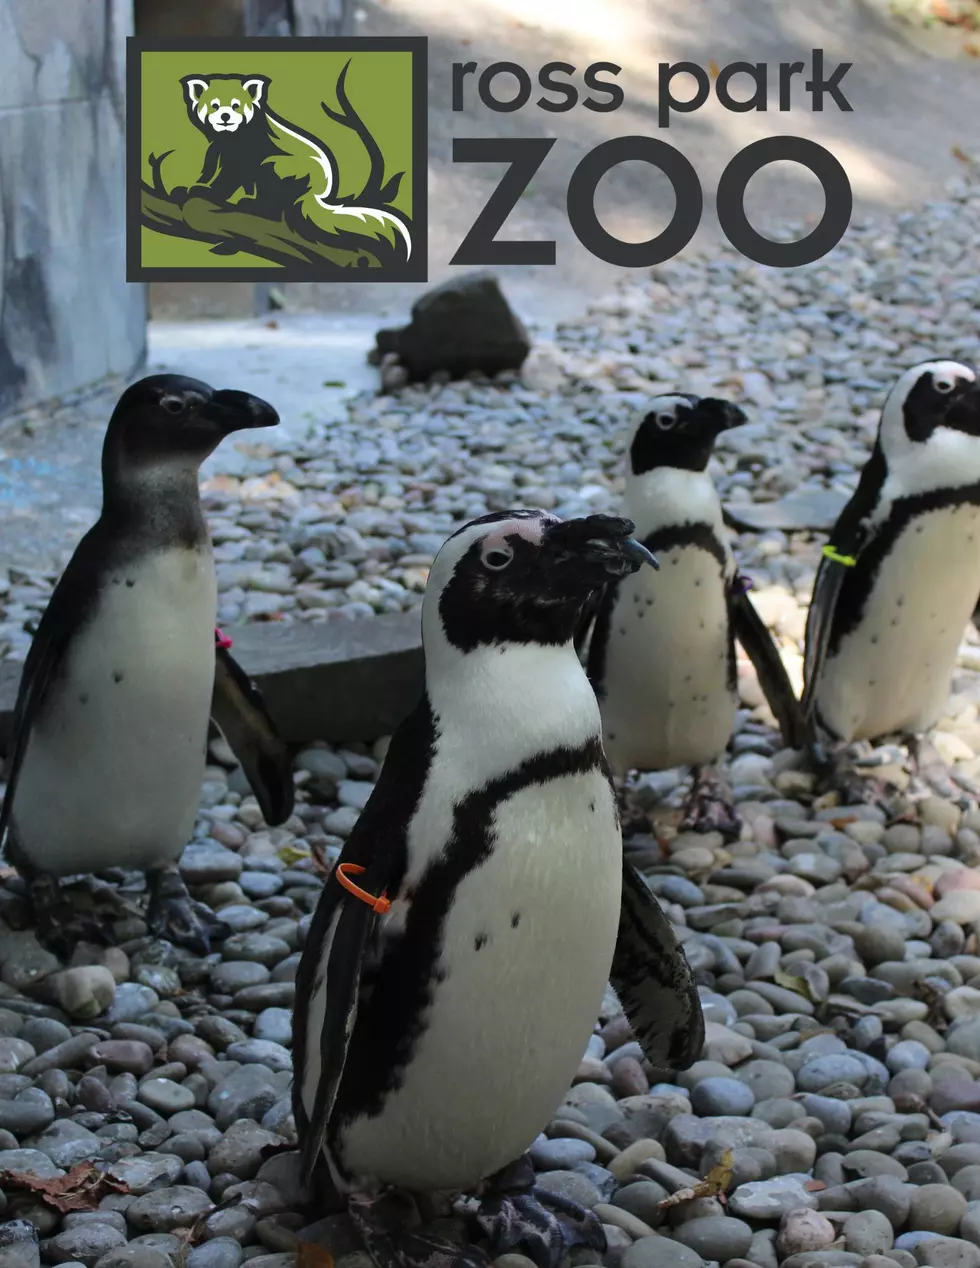 Uncover Exciting Activities At The Season Launch Of Binghamton’s Ross Park Zoo